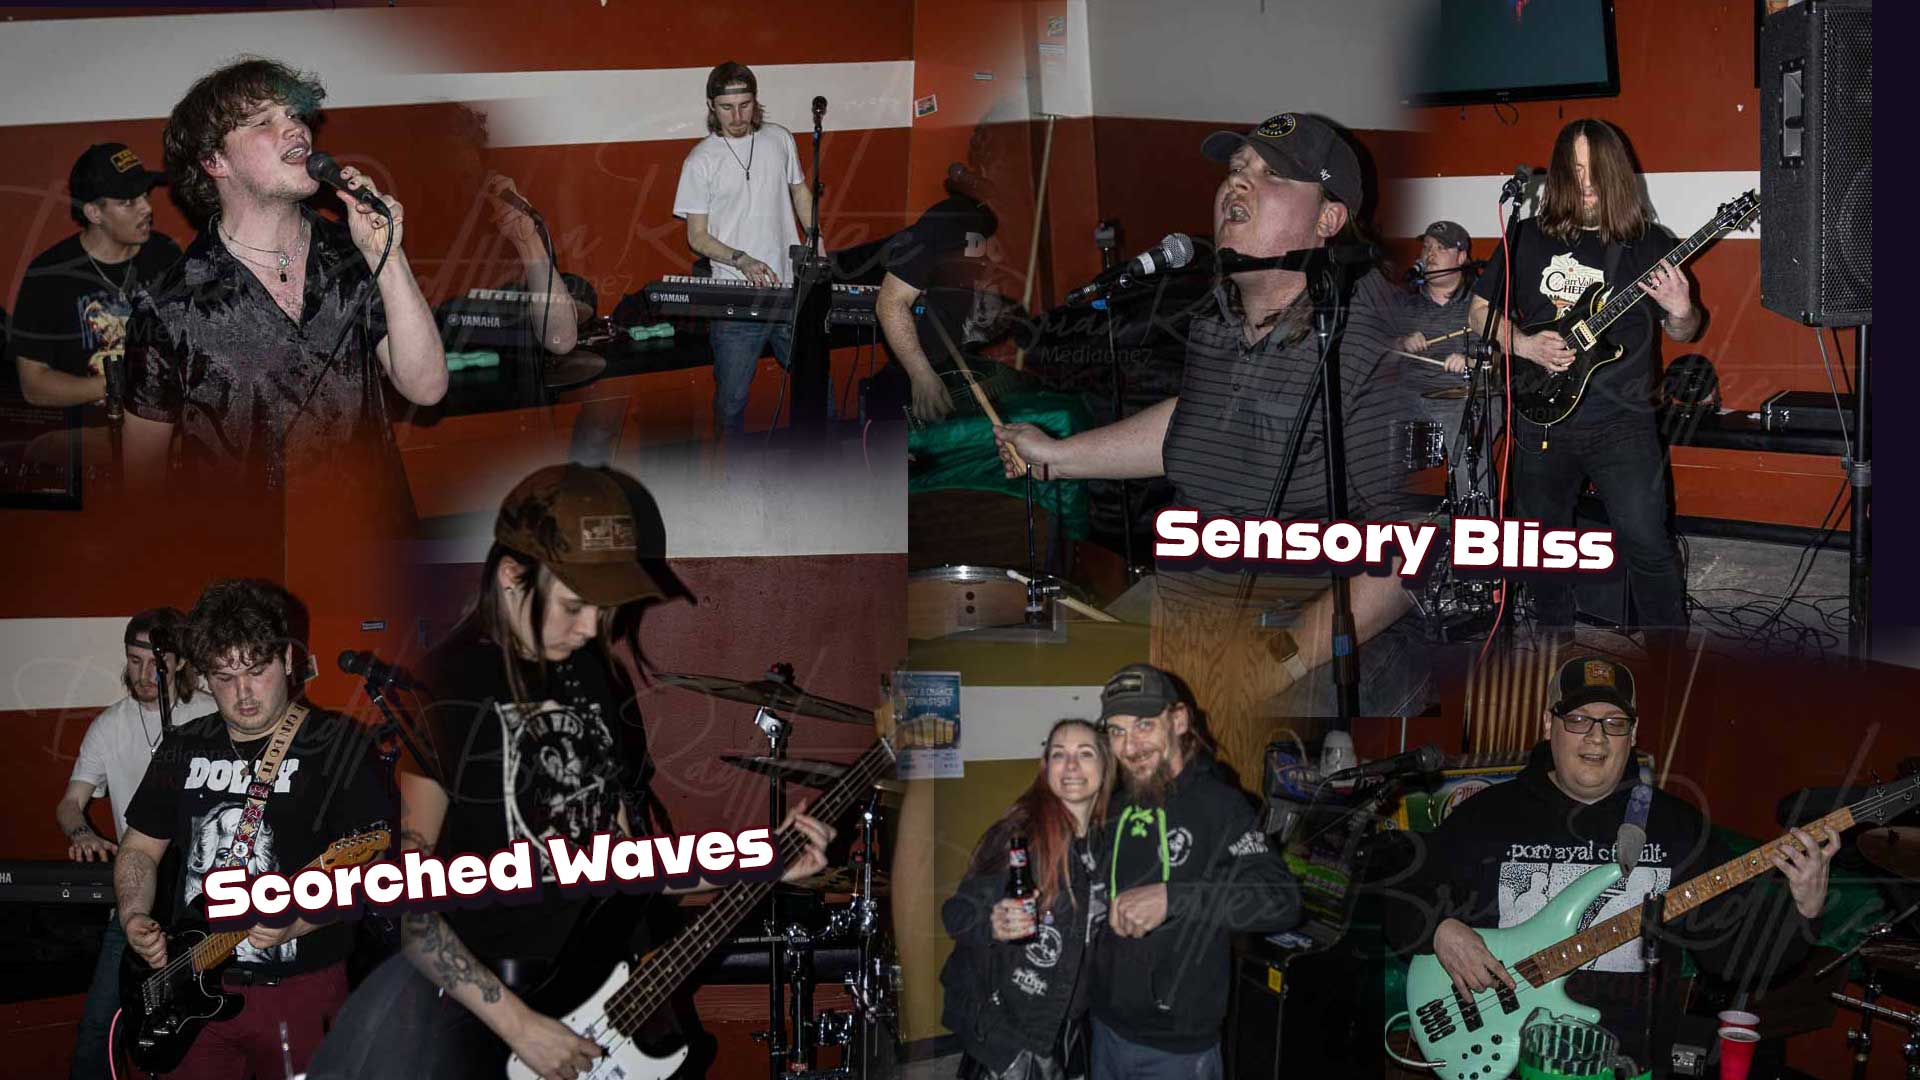 A Night at Study Hall with Scorched Waves, Sensory Bliss, and Toyboxes